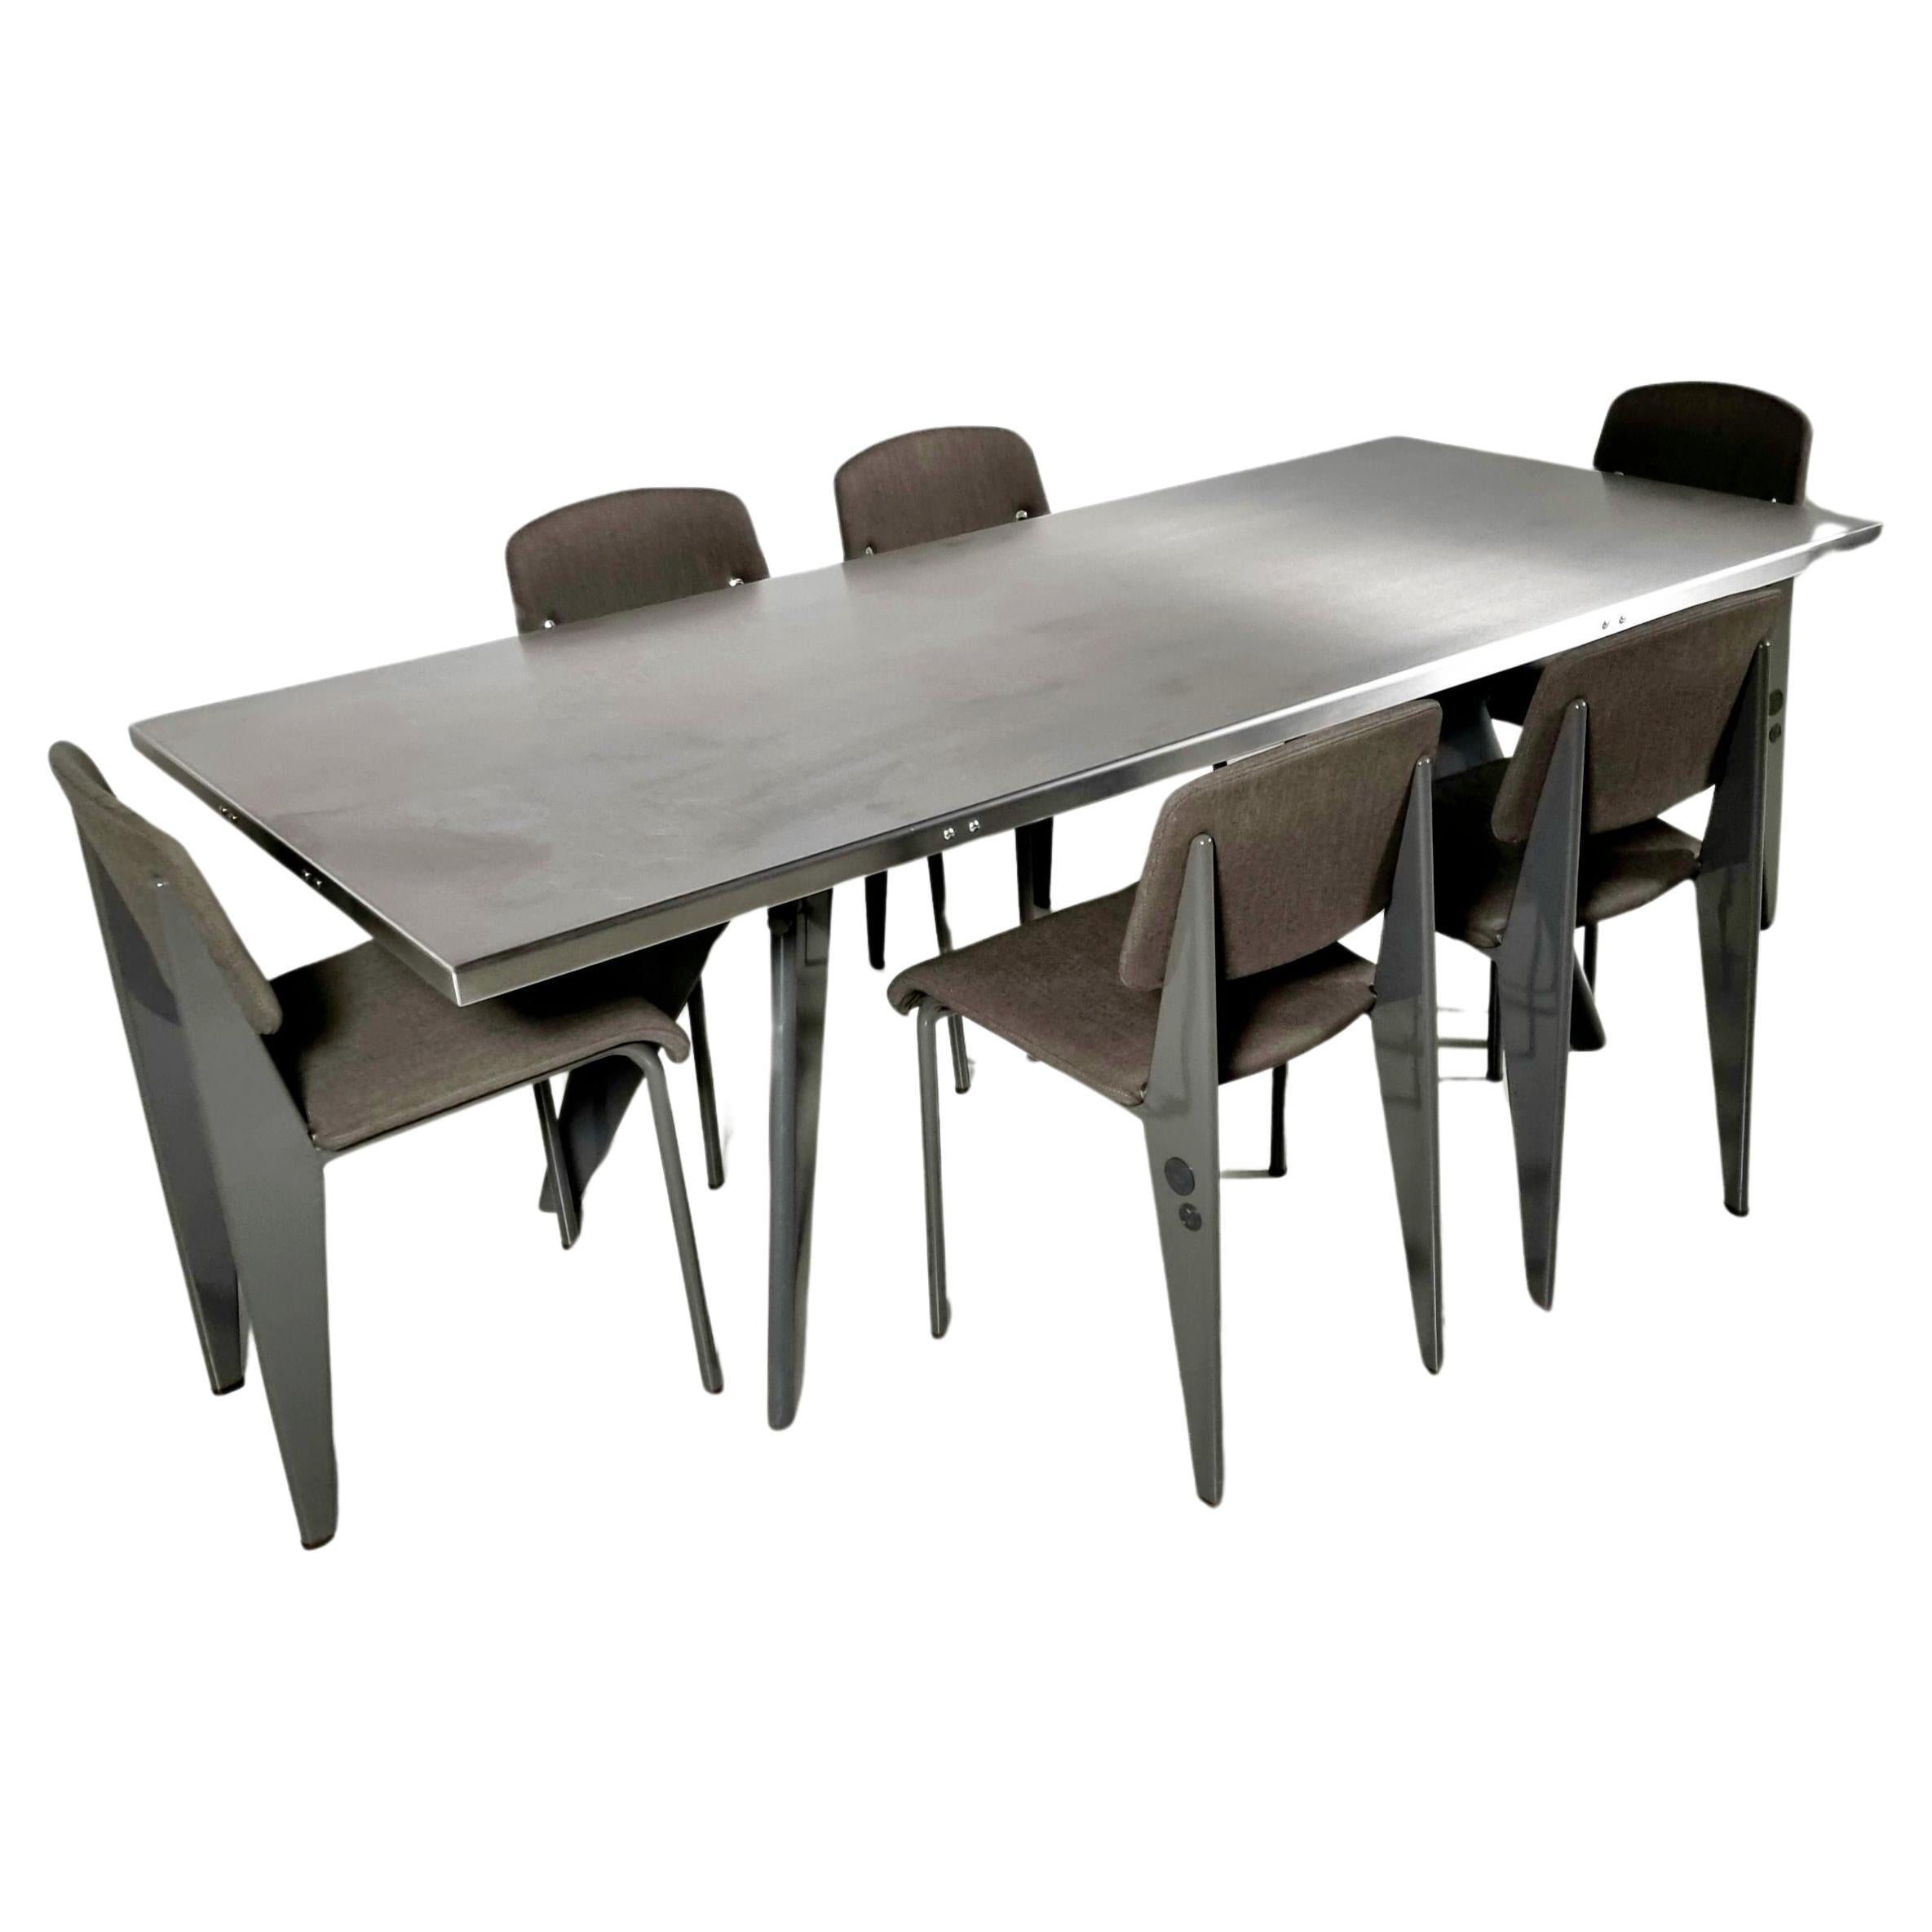 Jean Prouve by G-Star Raw for Vitra S.A.M. Tropique Table with matching chairs For Sale